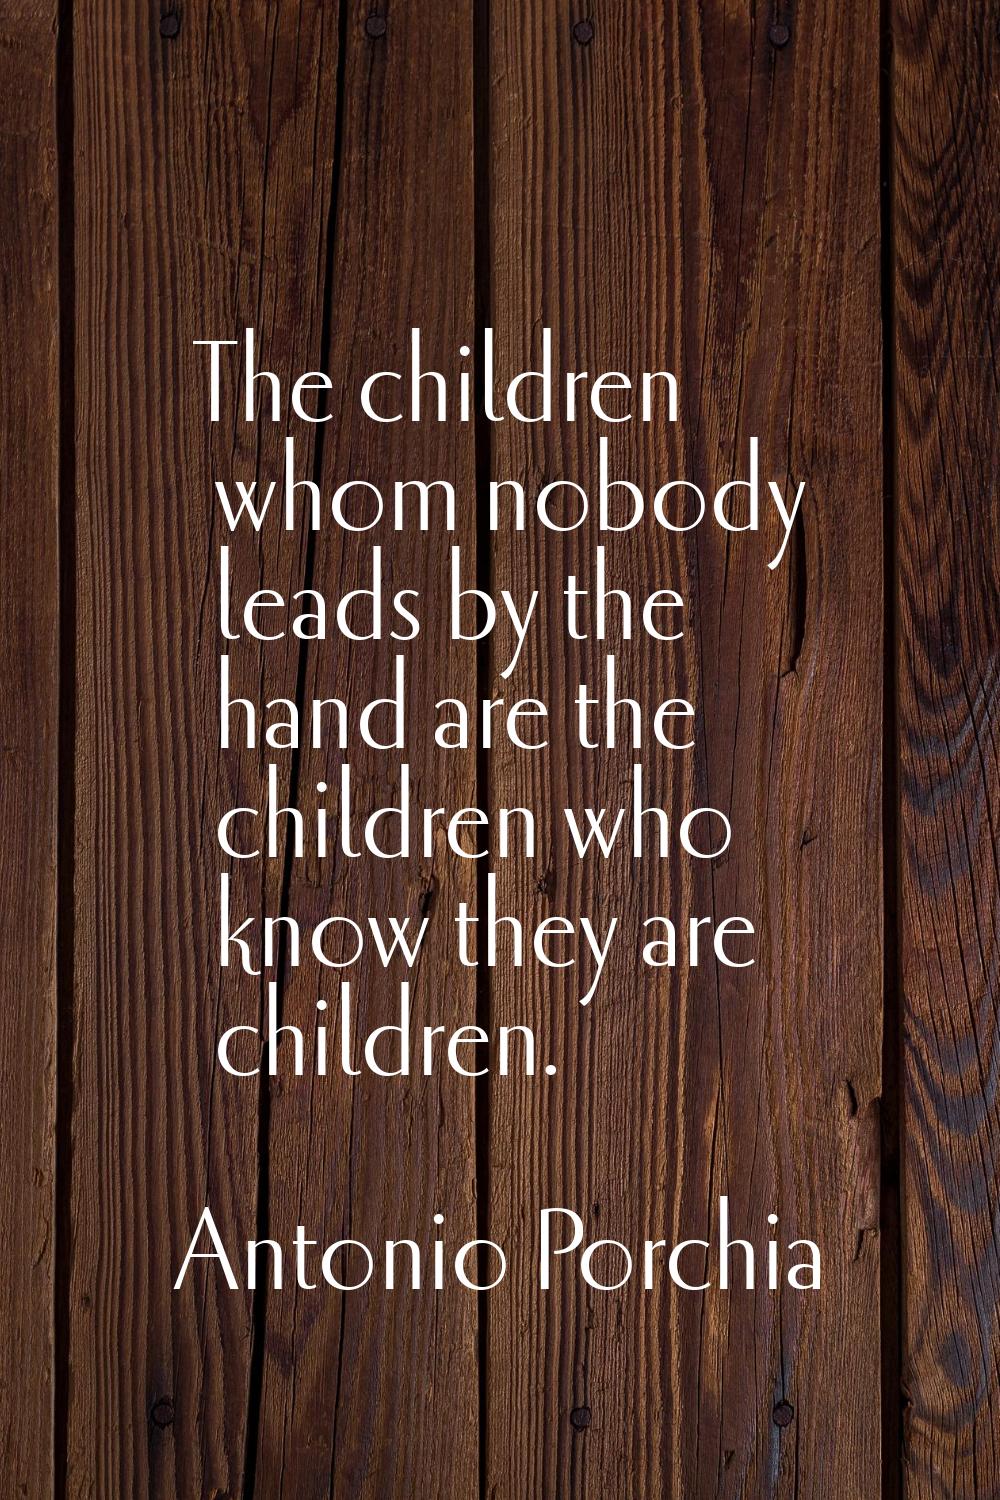 The children whom nobody leads by the hand are the children who know they are children.